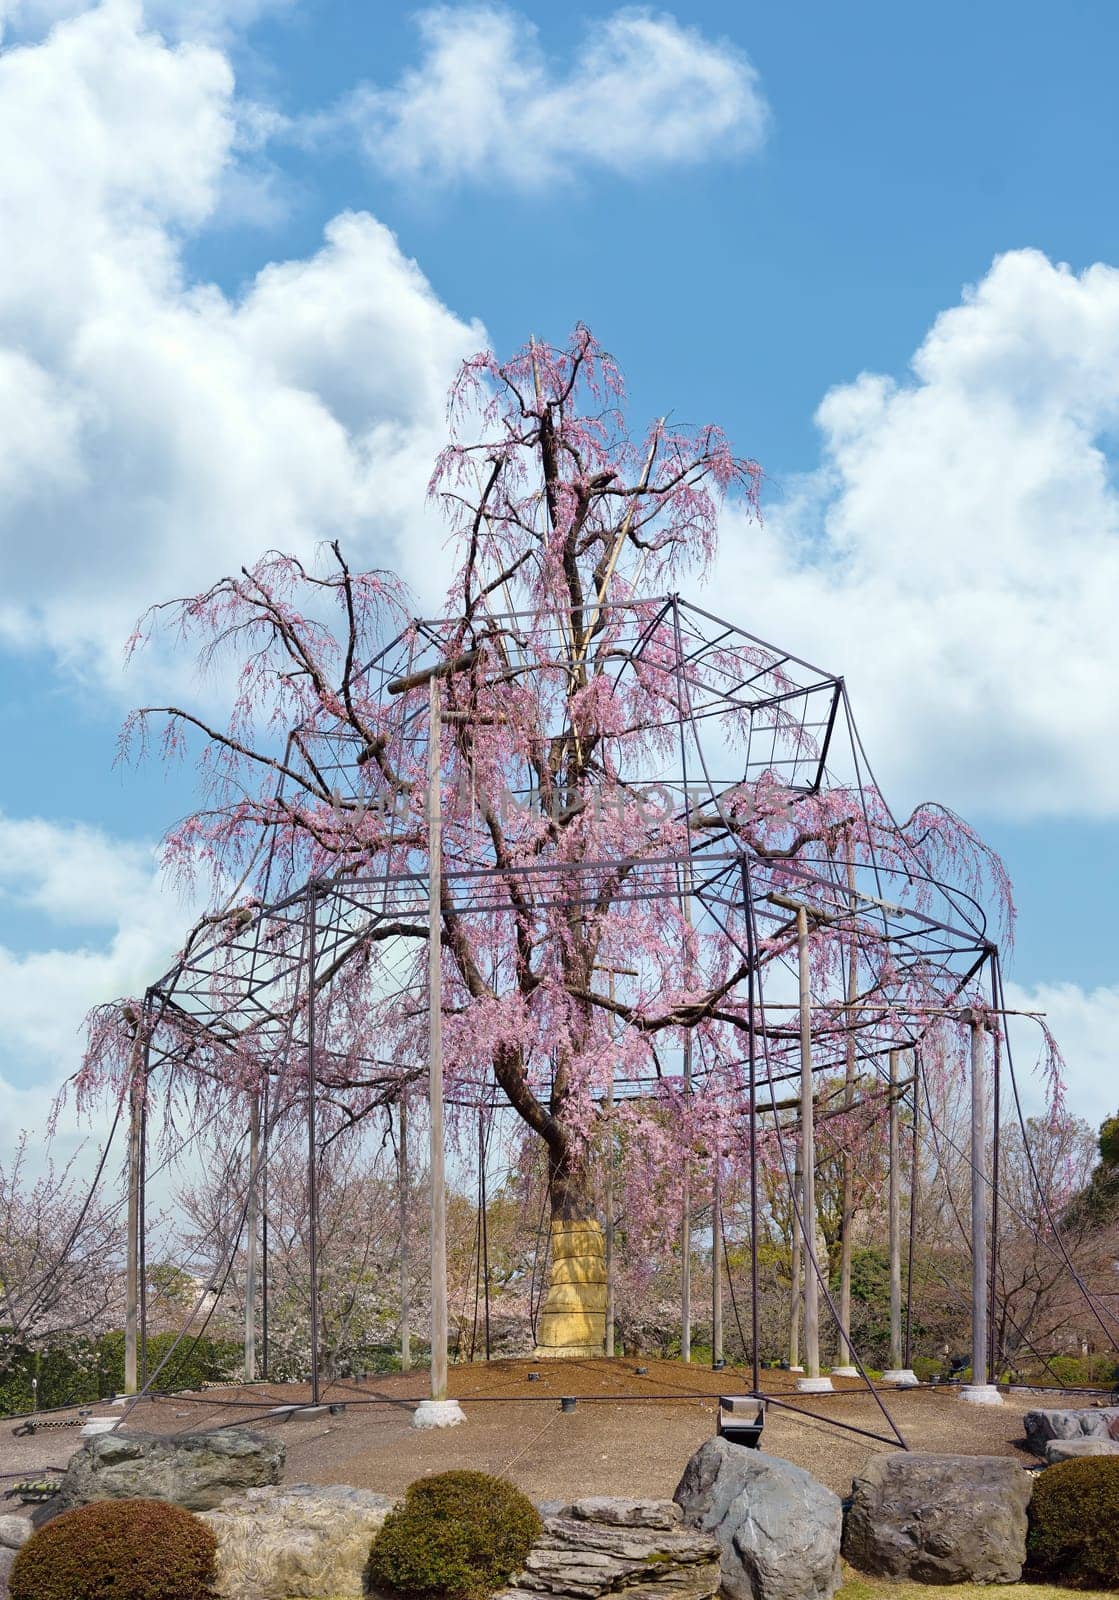 A century-old weeping cherry tree with pink flowers on its long drooping branches in the garden of Toji temple in Kyoto. by kuremo